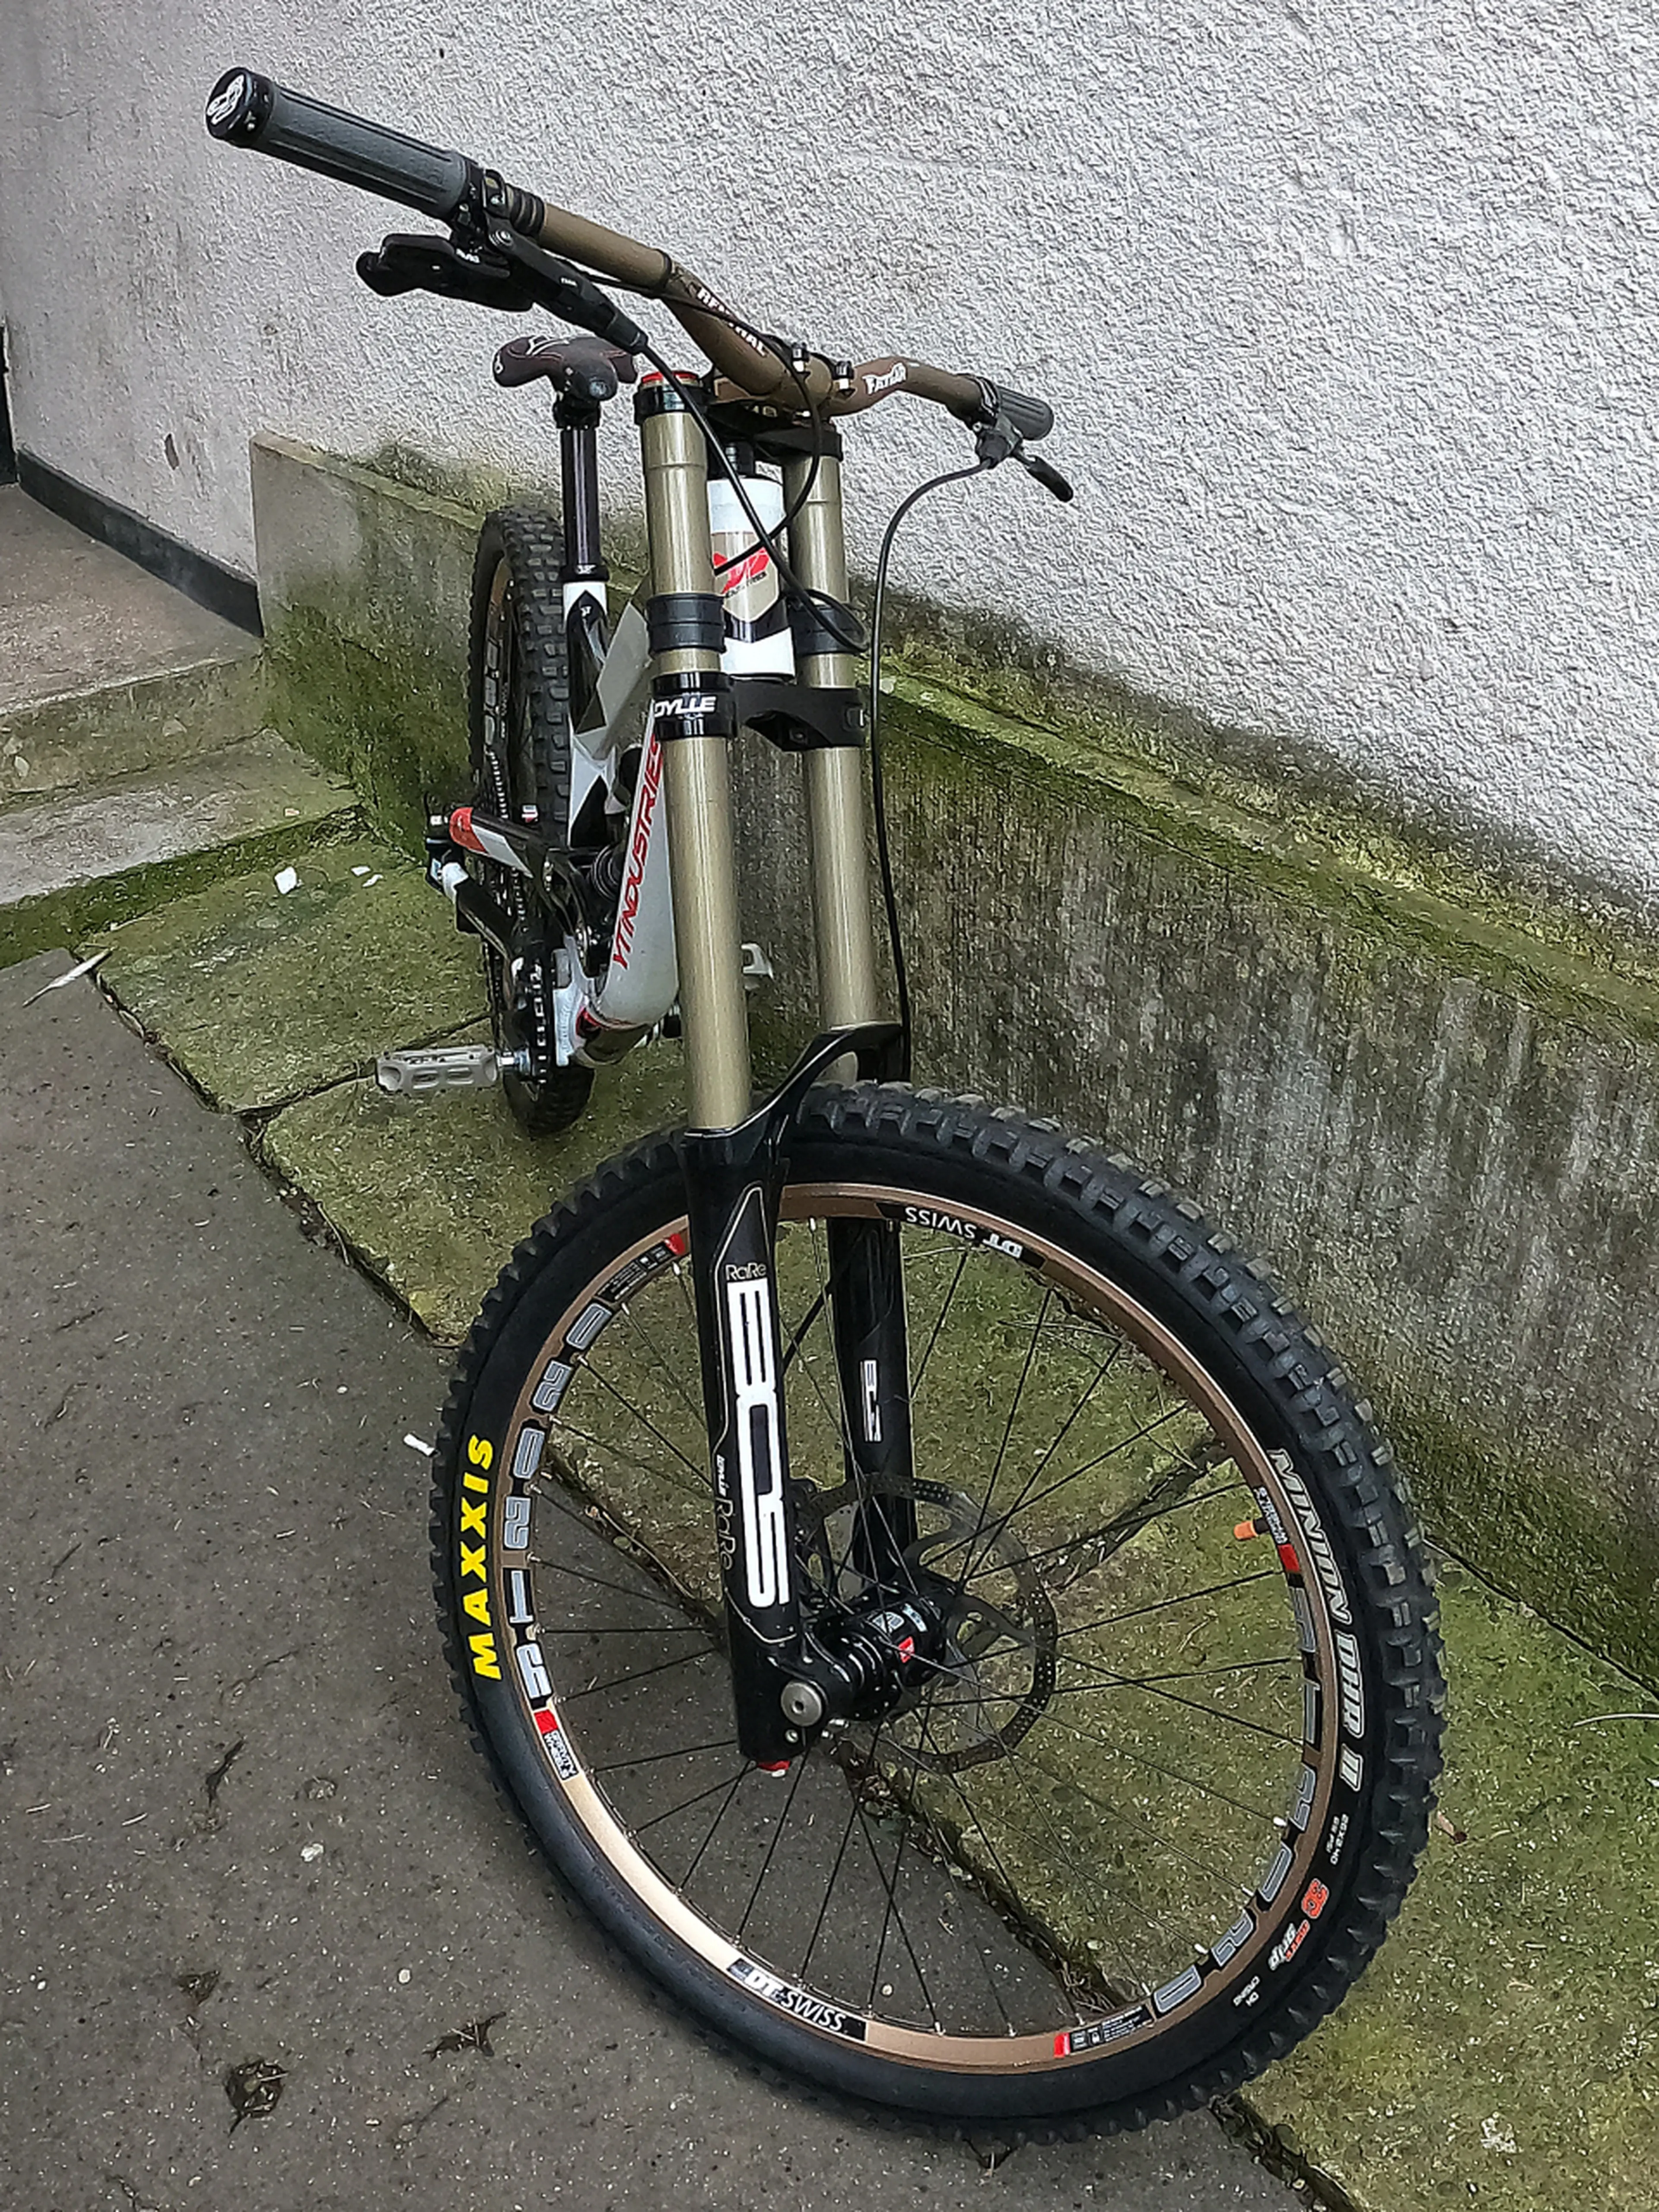 2. YT Industries Pro edition